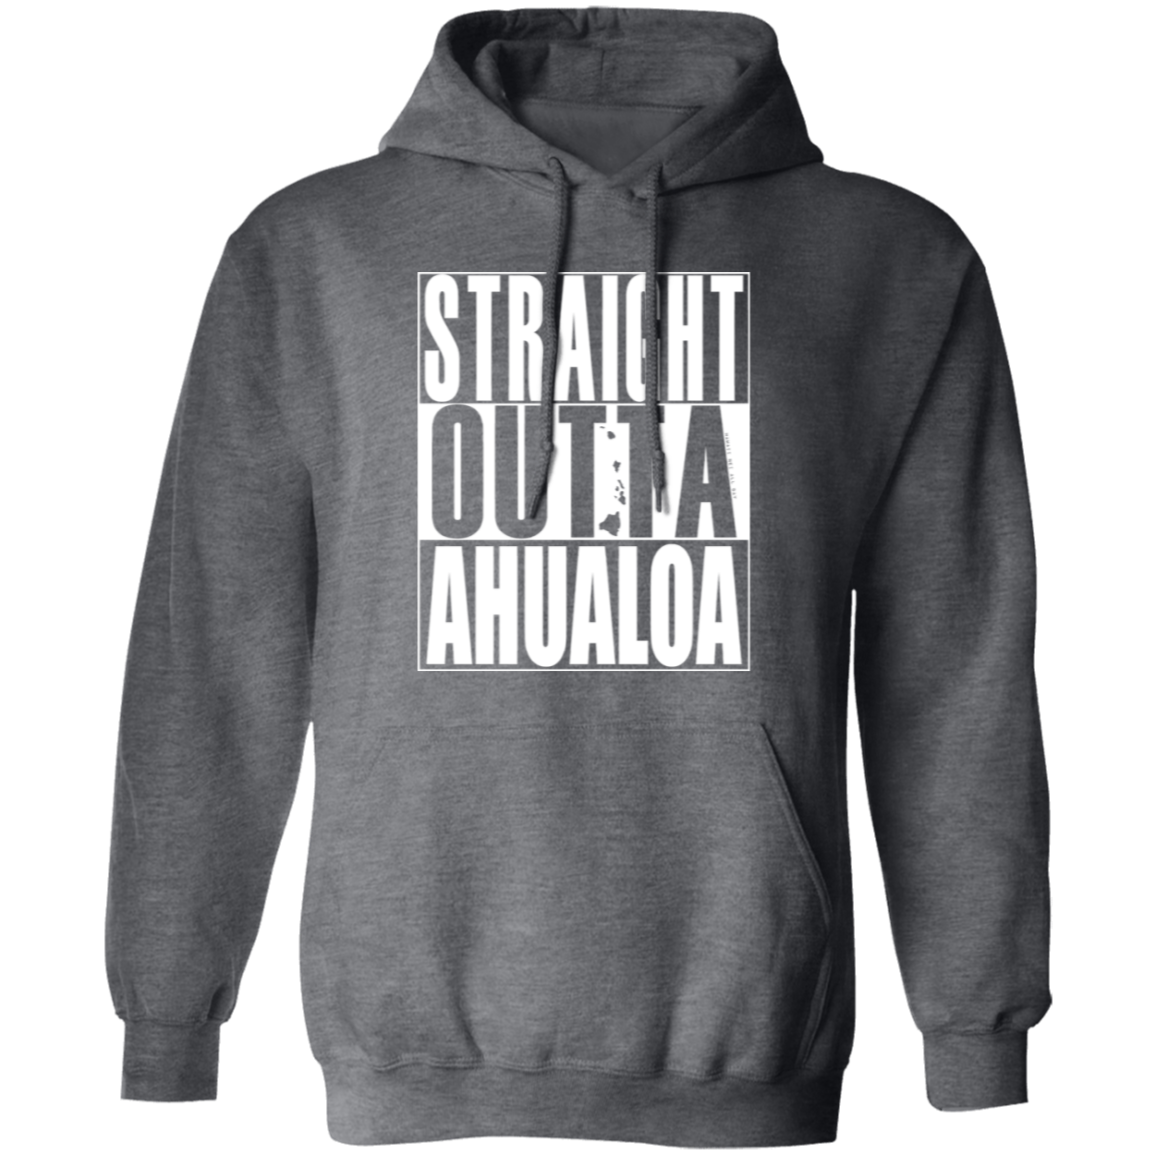 Straight Outta Ahualoa (white ink) Pullover Hoodie